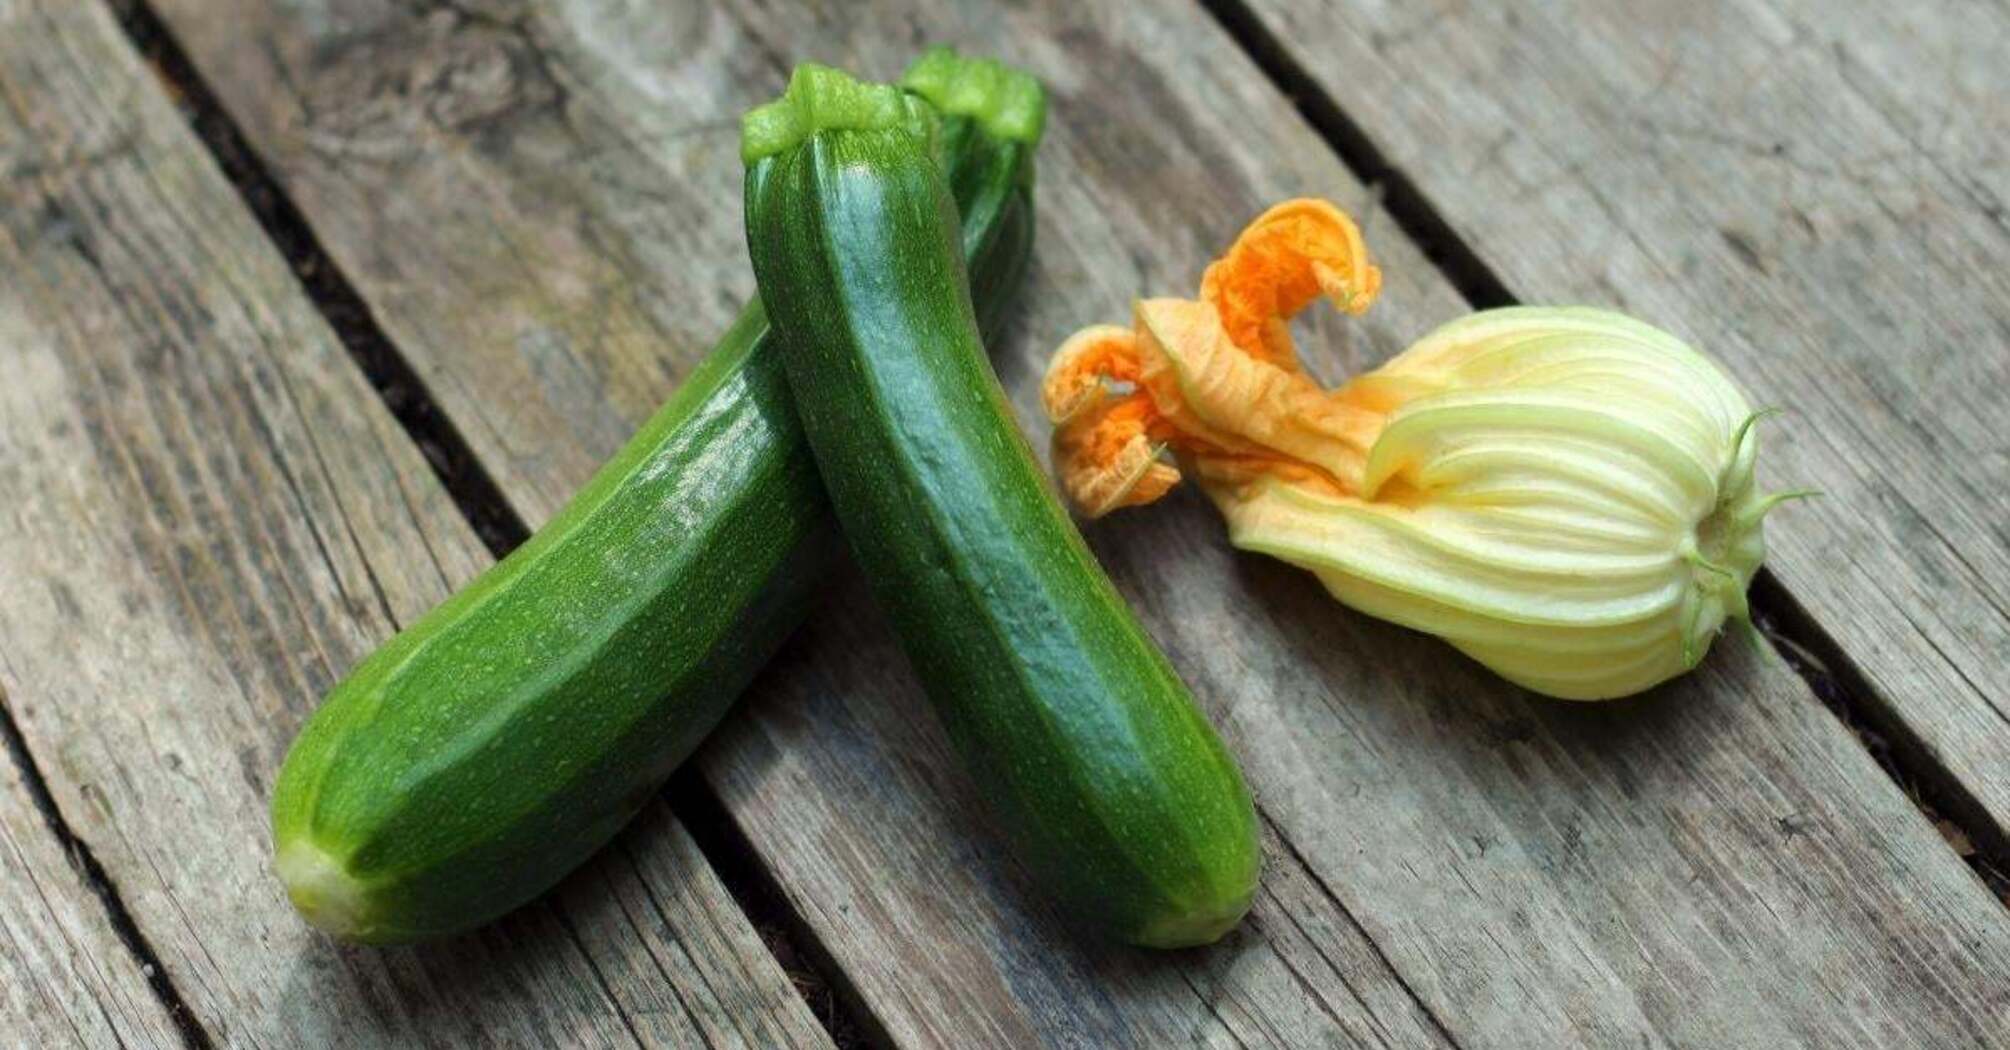 The best zucchini varieties recommended by experts